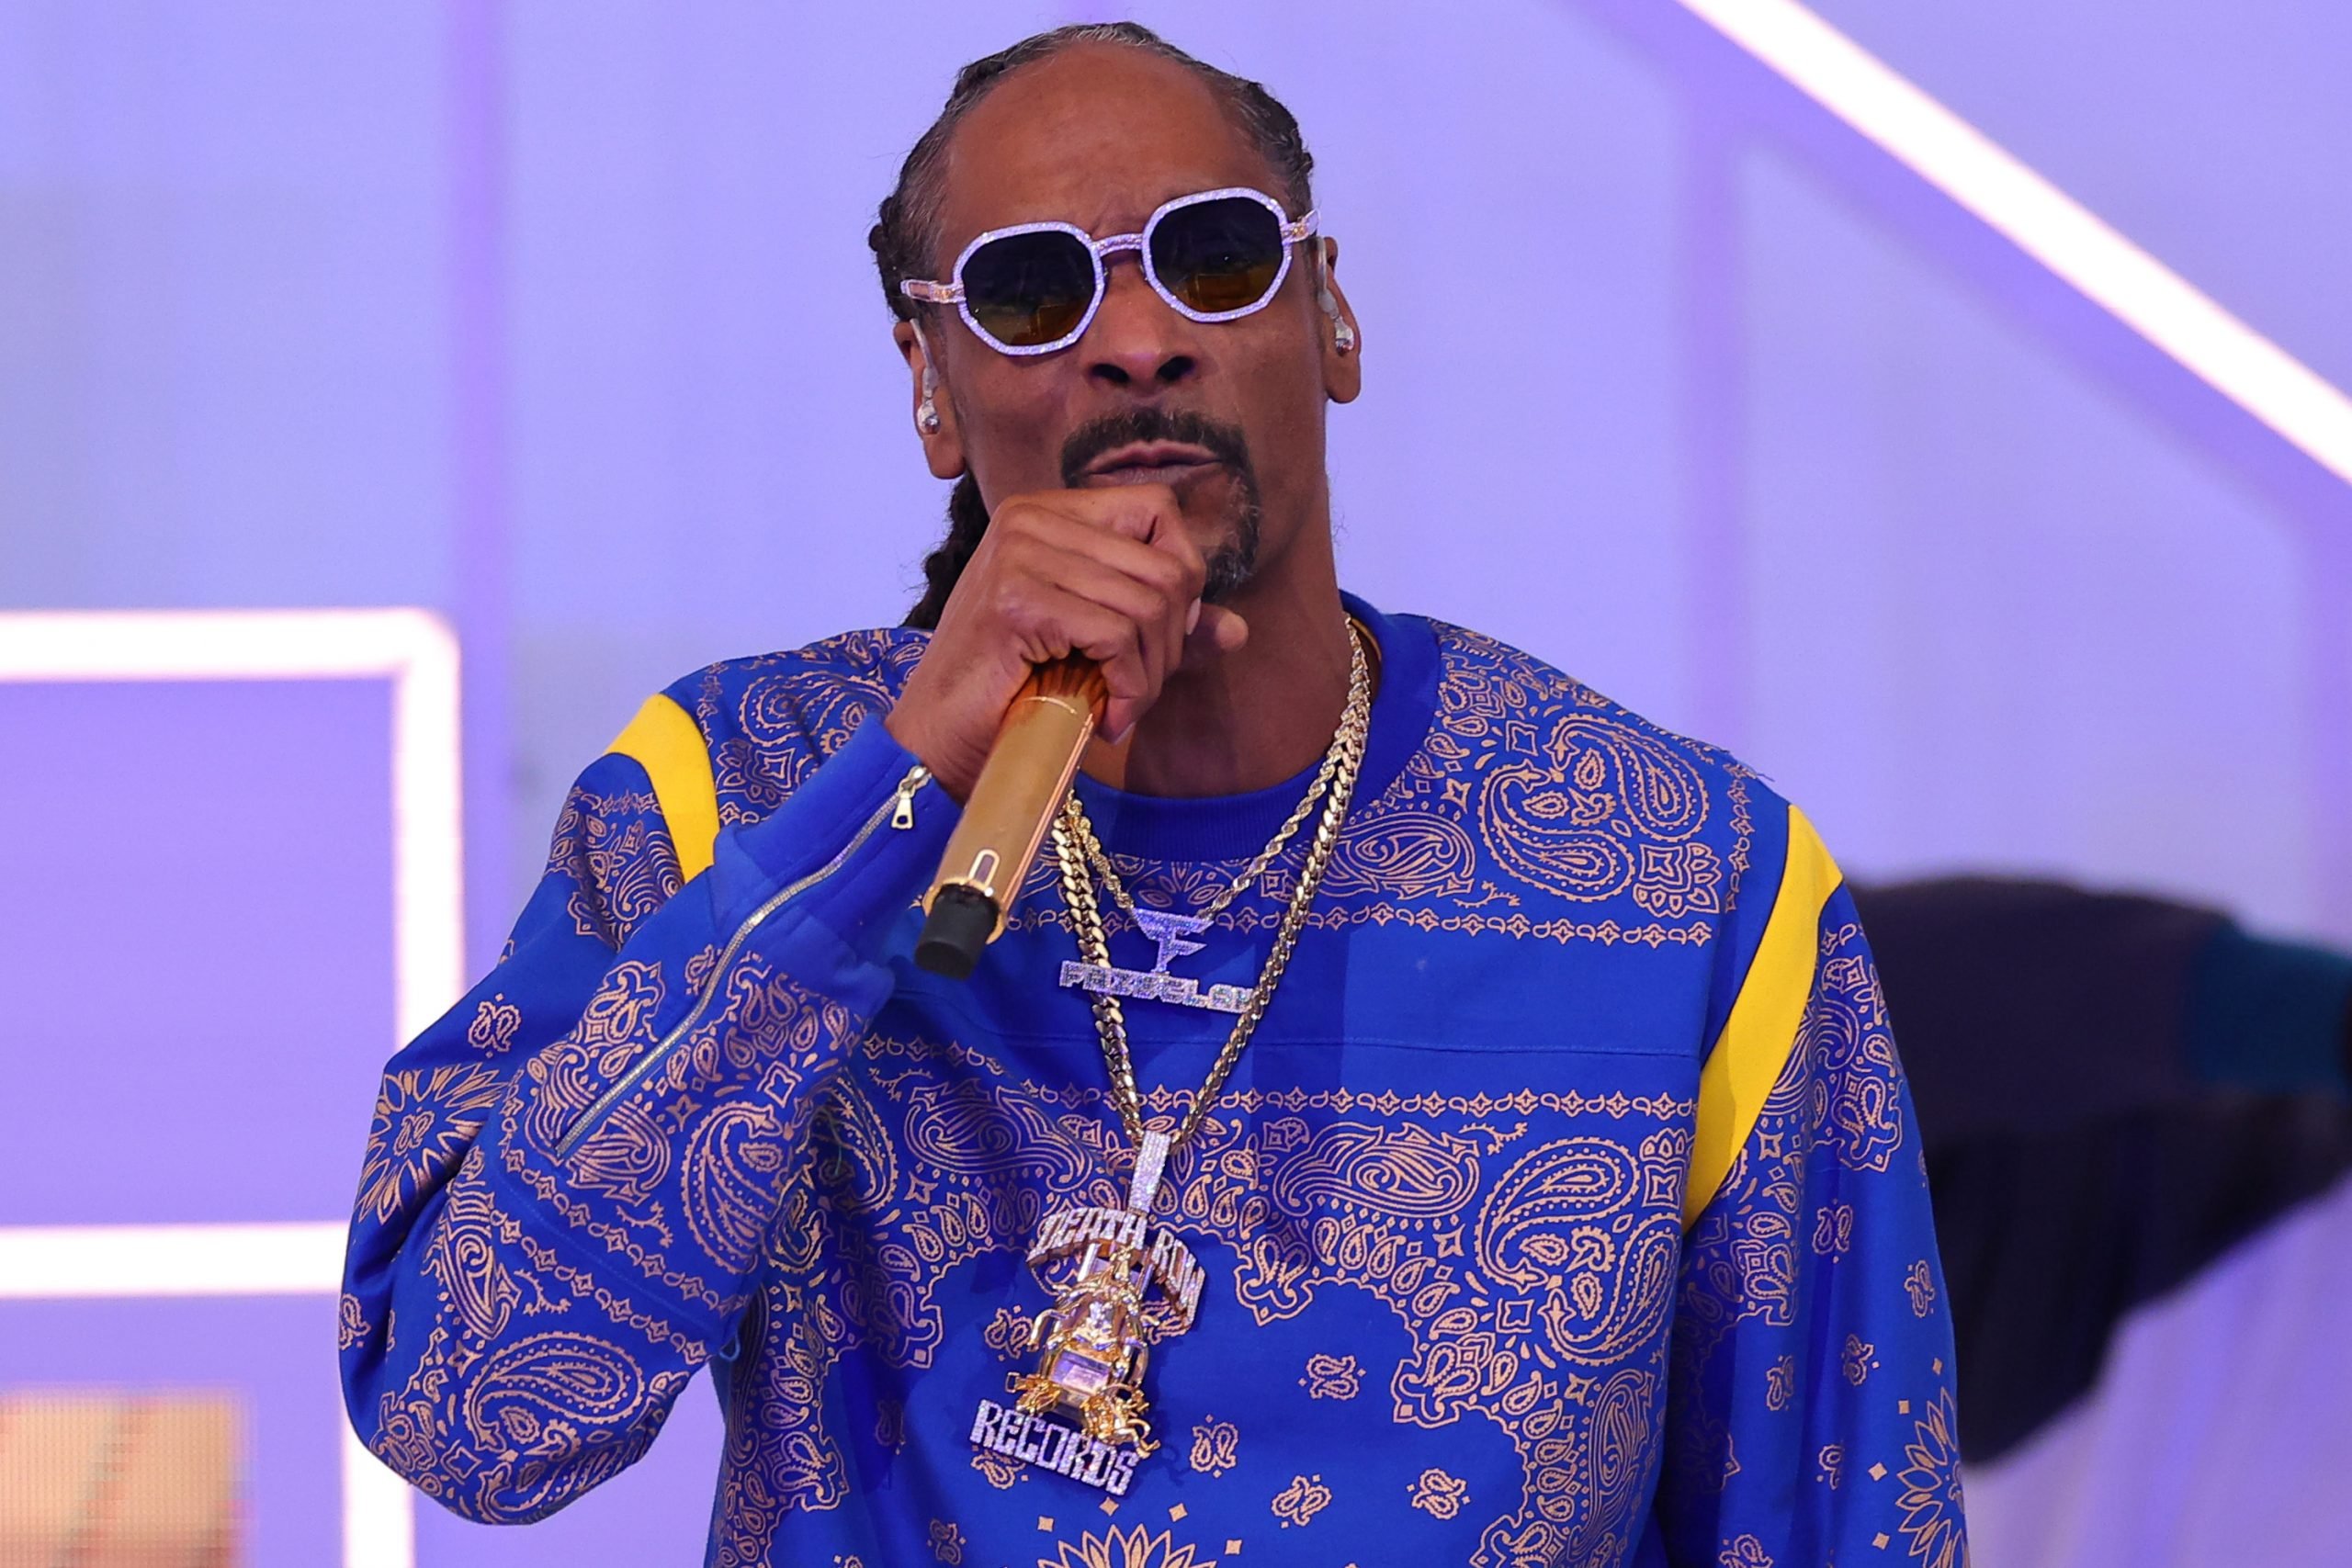 Snoop Dogg Included Gang References In His Super Bowl Halftime Show